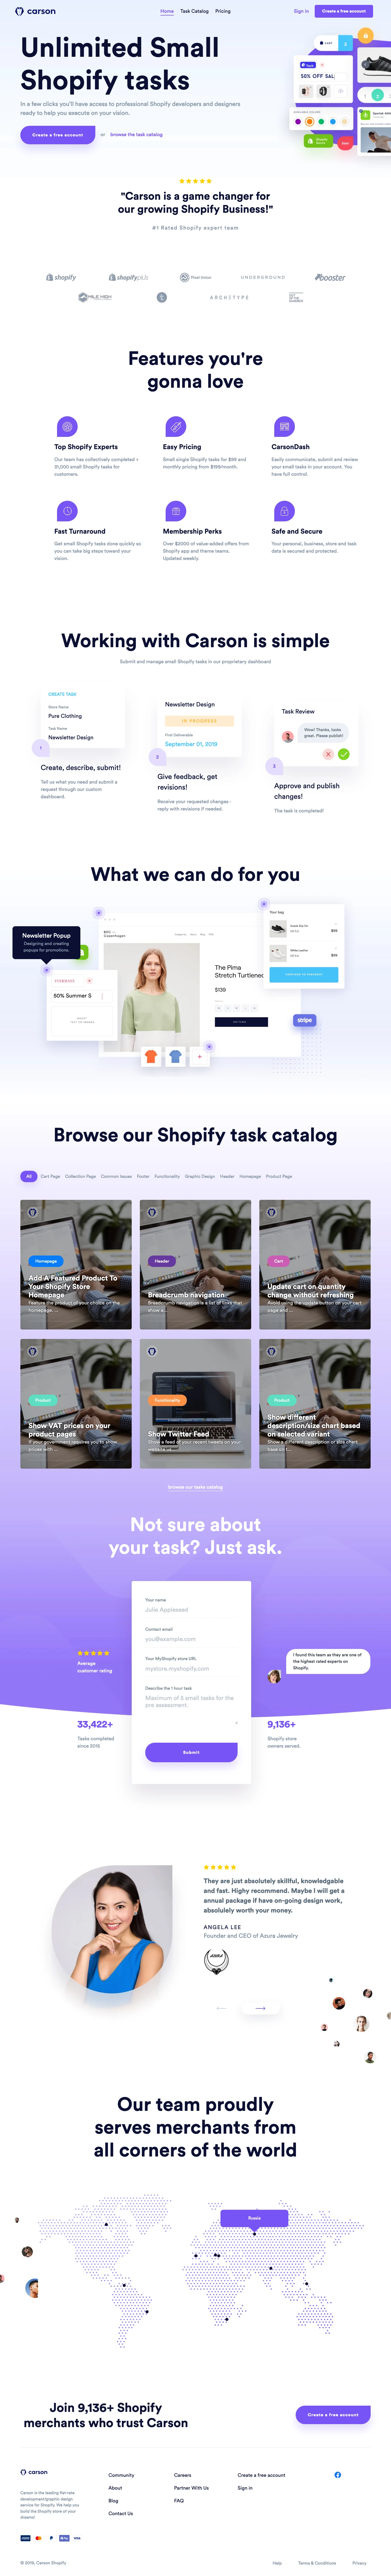 Carson Landing Page Example: Carson is one of the highest rated Shopify experts based in Canada for small theme customizations. We help you build the Shopify store of your dreams!